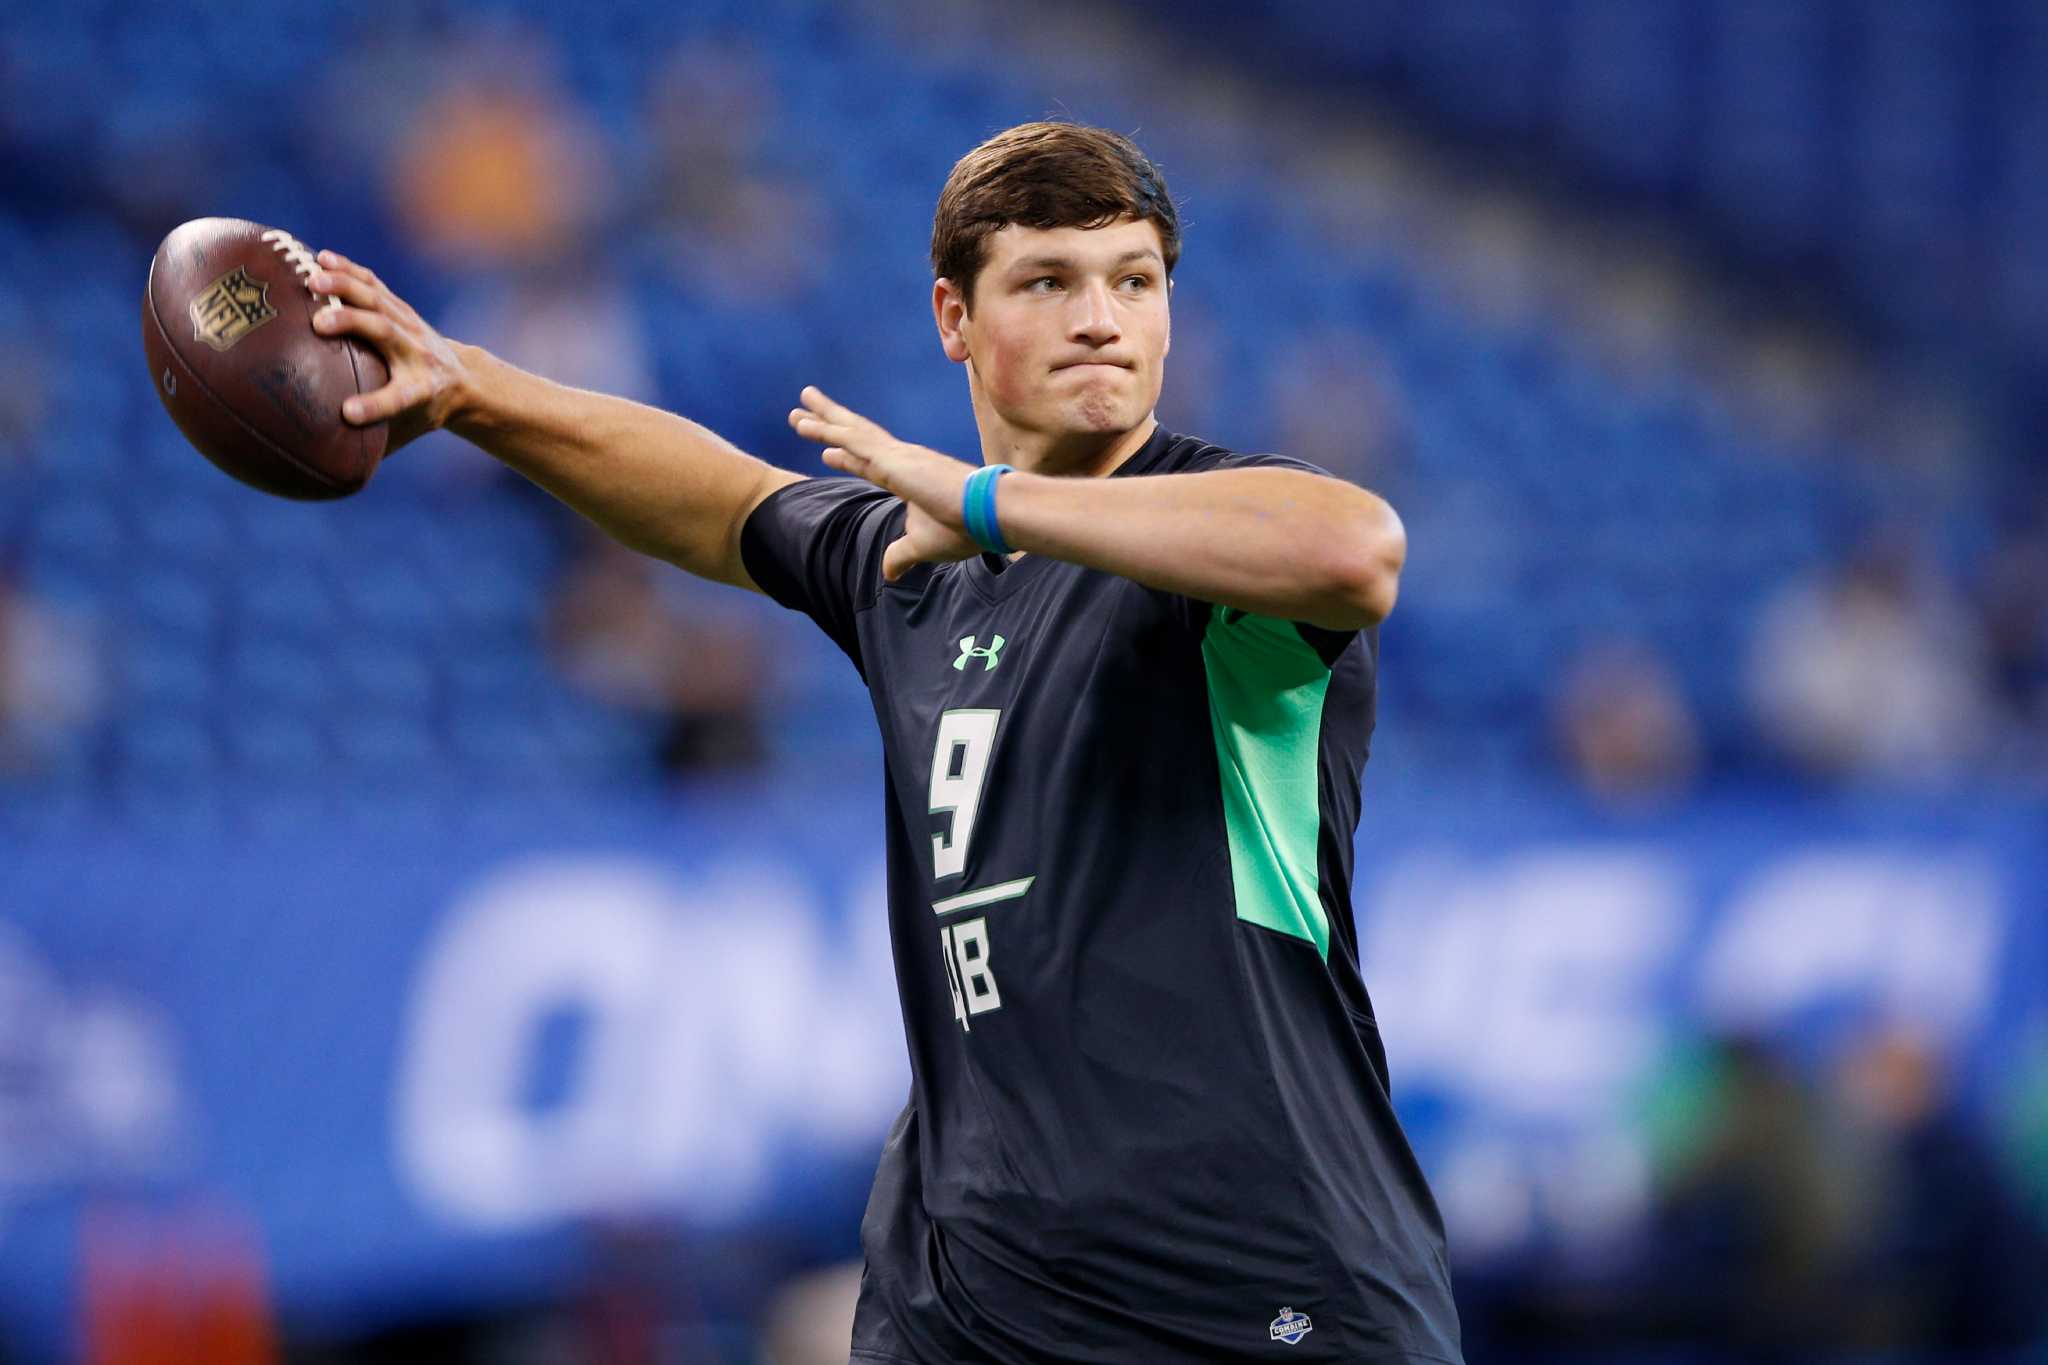 Penn State's O'Brien enthused about working with QB candidates Hackenberg,  Ferguson, Sports